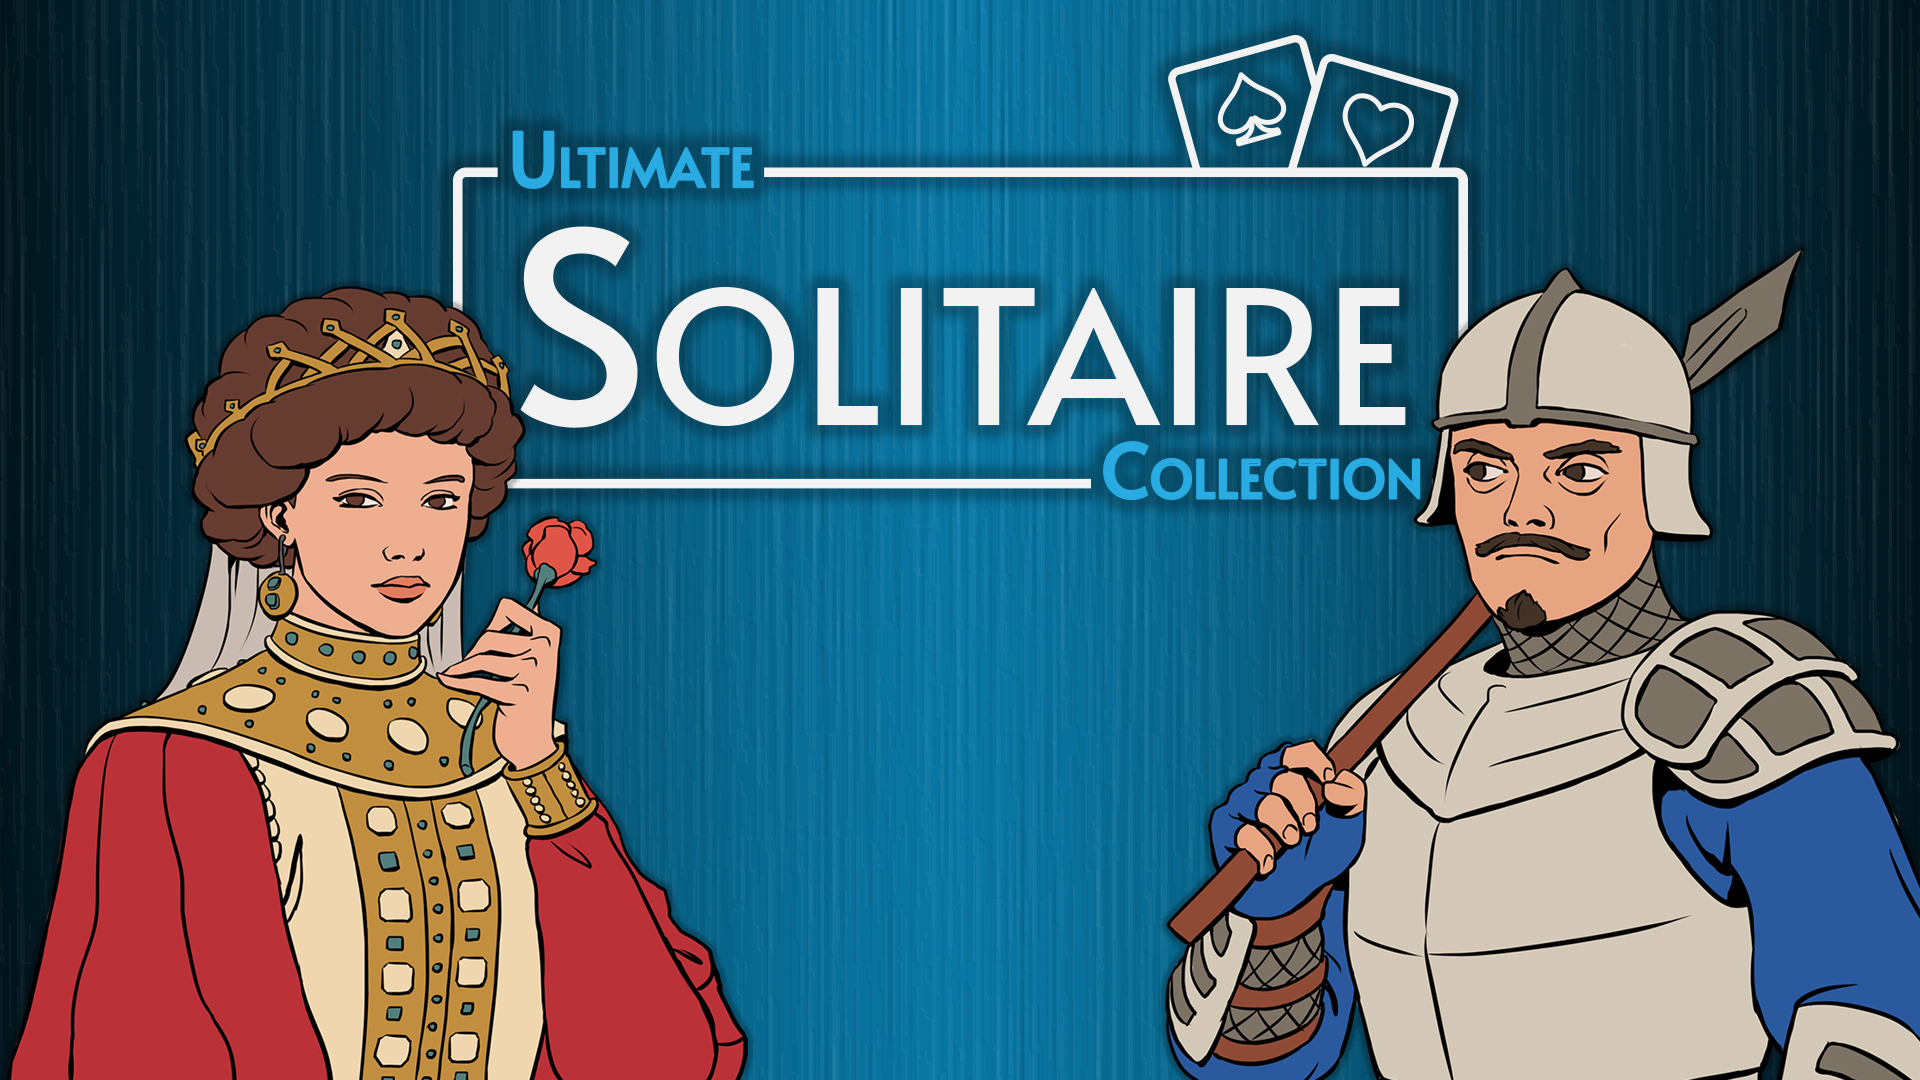 Kawaii Solitaire 3 in 1  Nintendo Switch download software